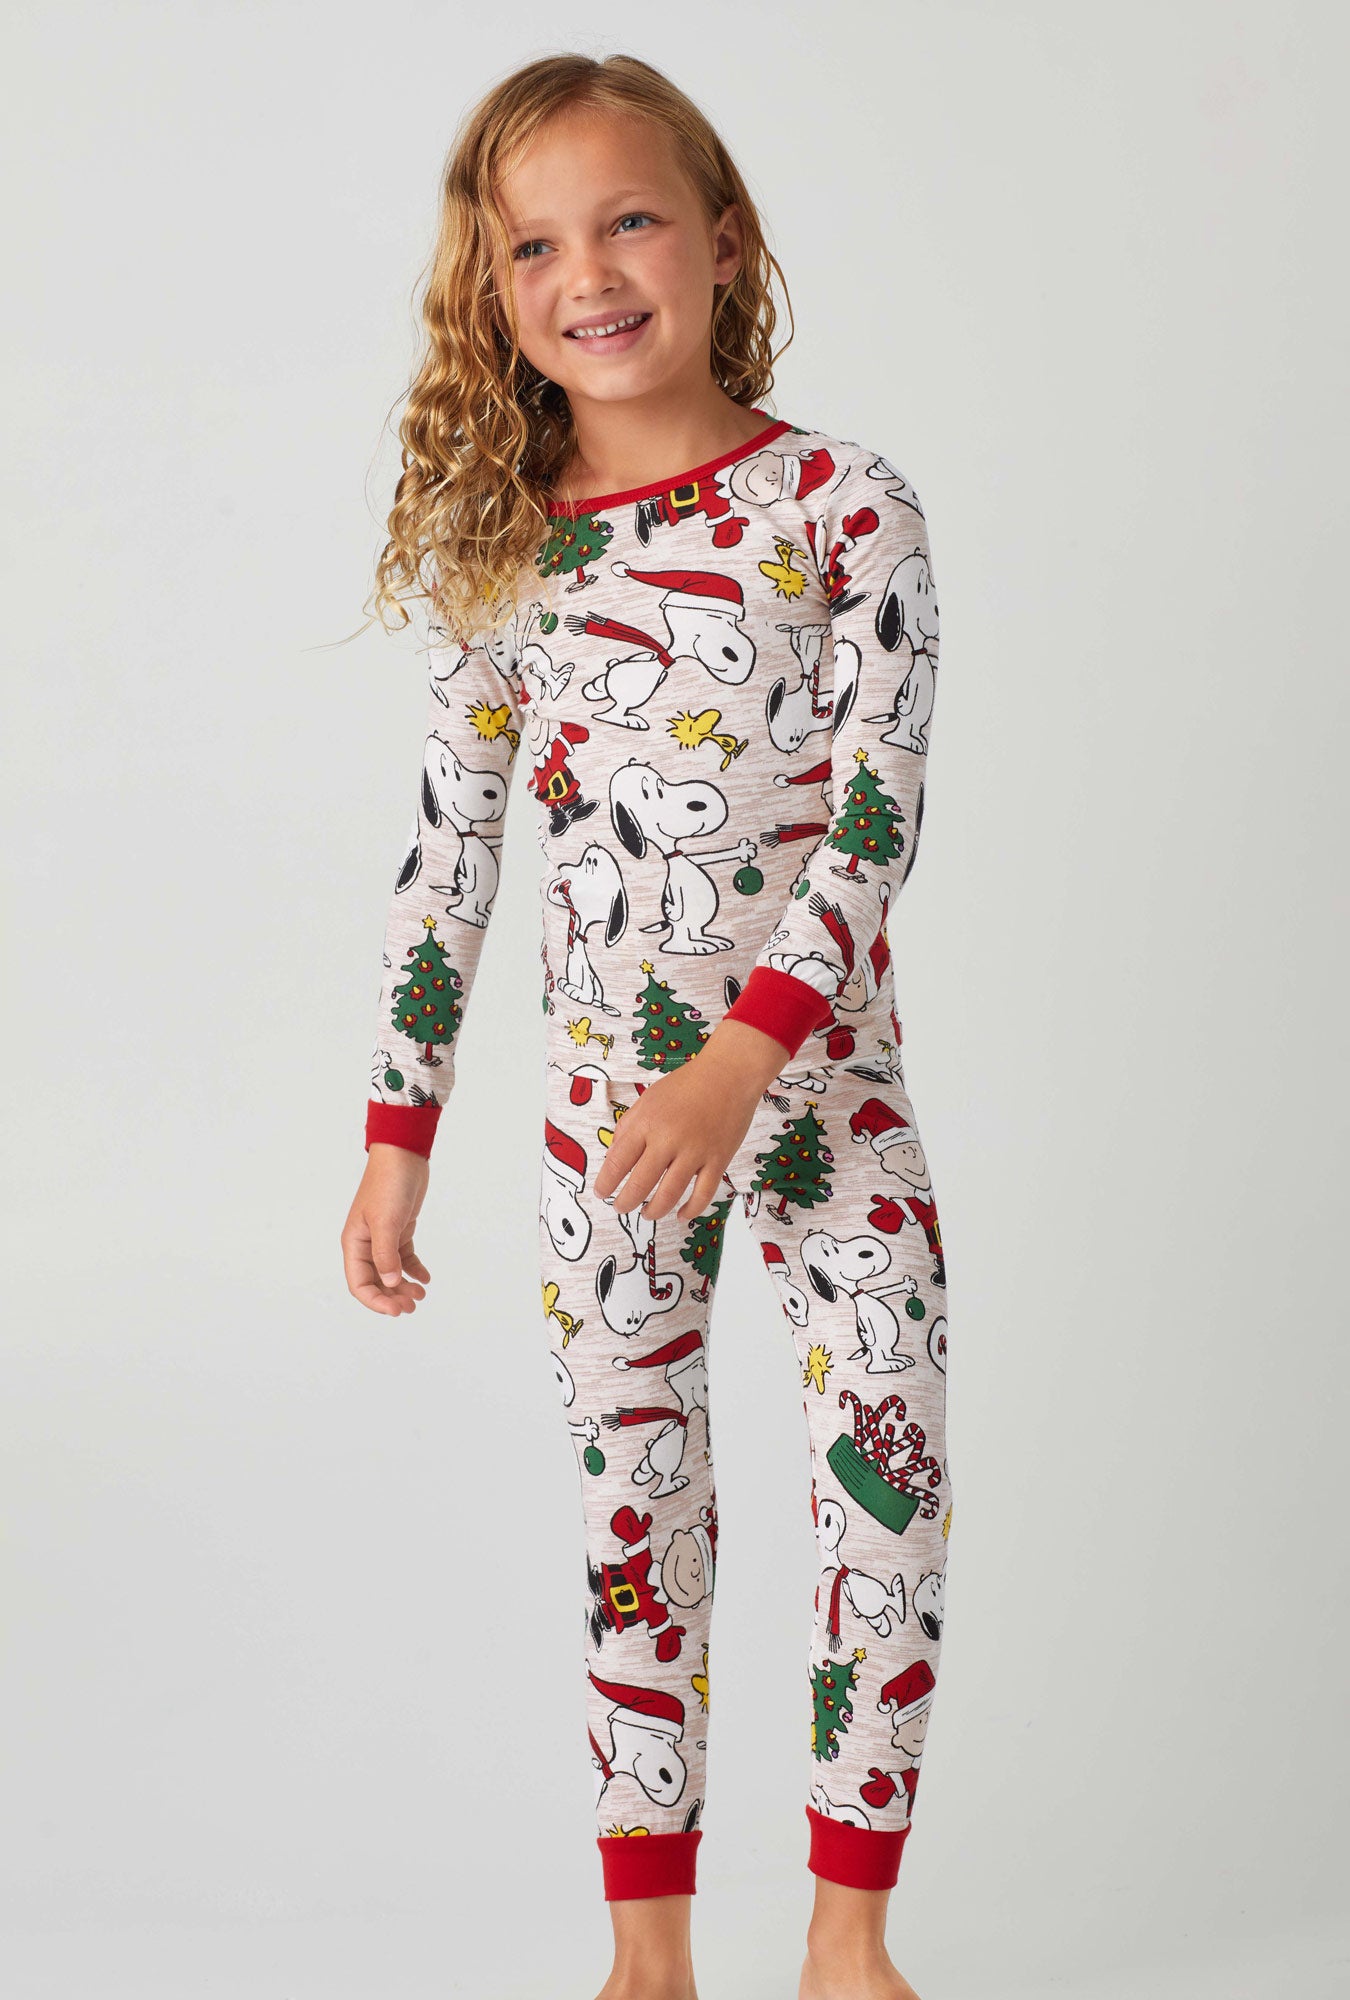 A kid wearing beige long sleeve classic stretch jersey pj set with merry christemas charlie brown print.